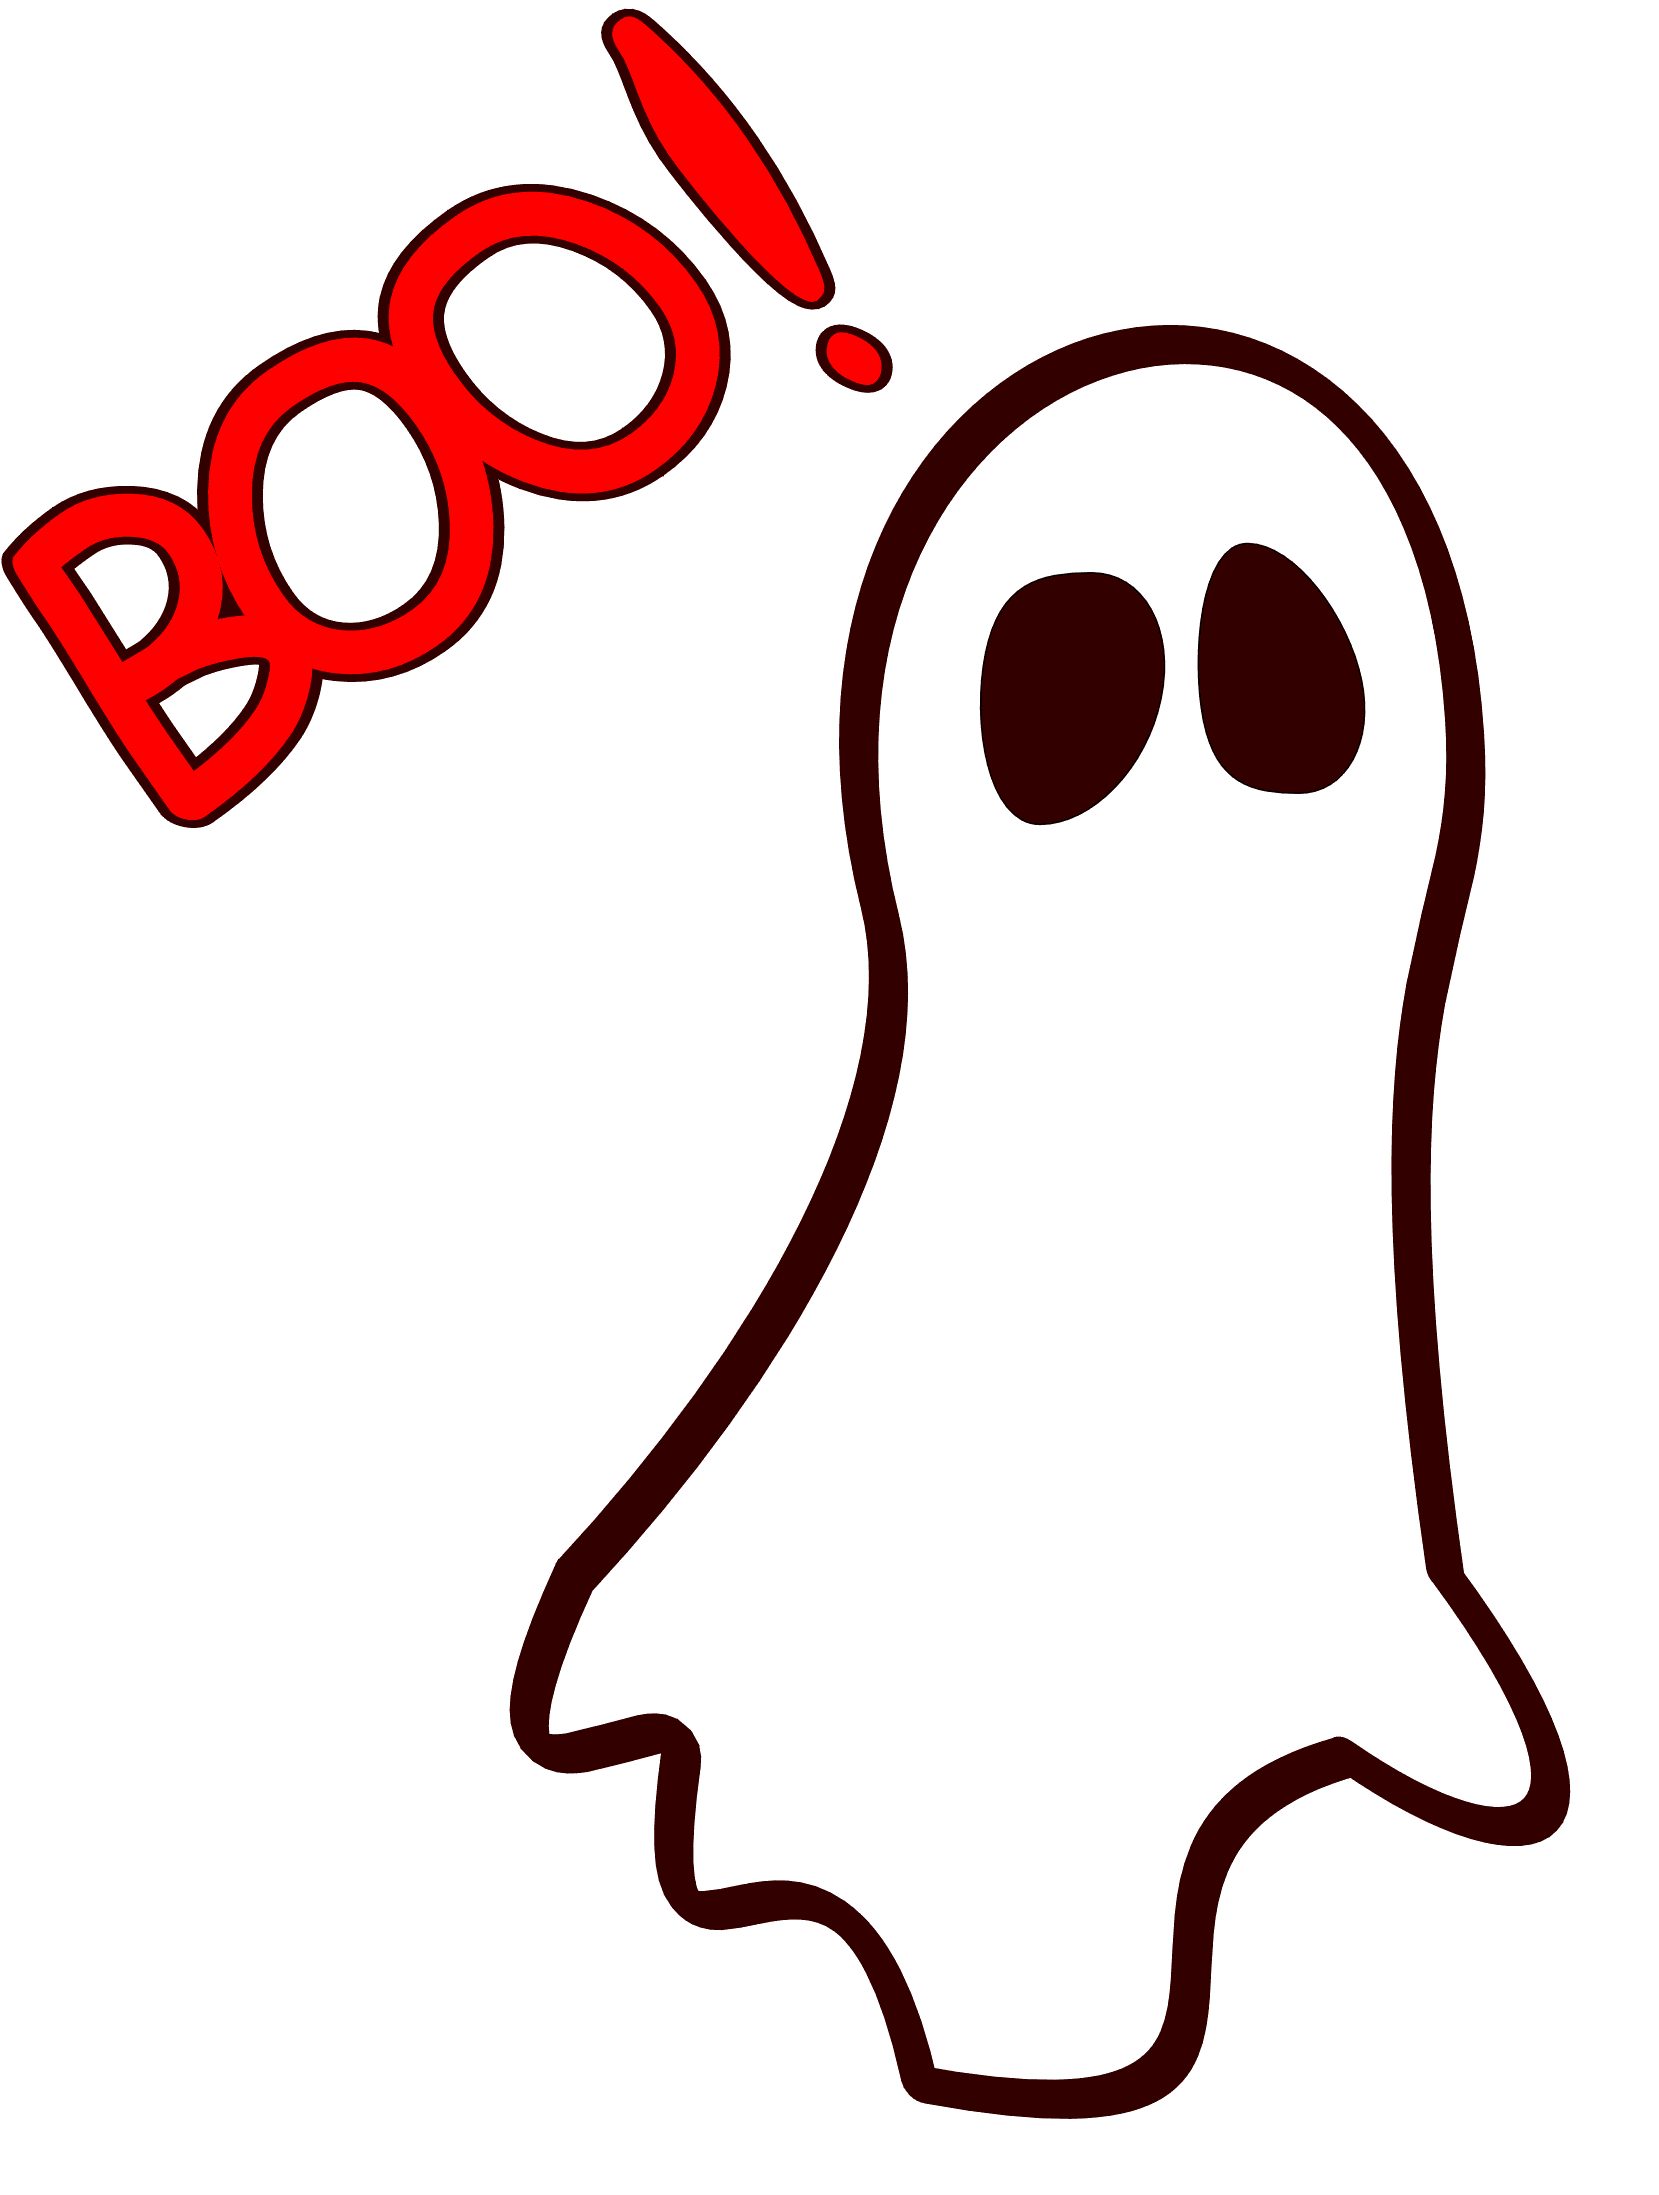 Ghost Saying Boo   Cliparts Co